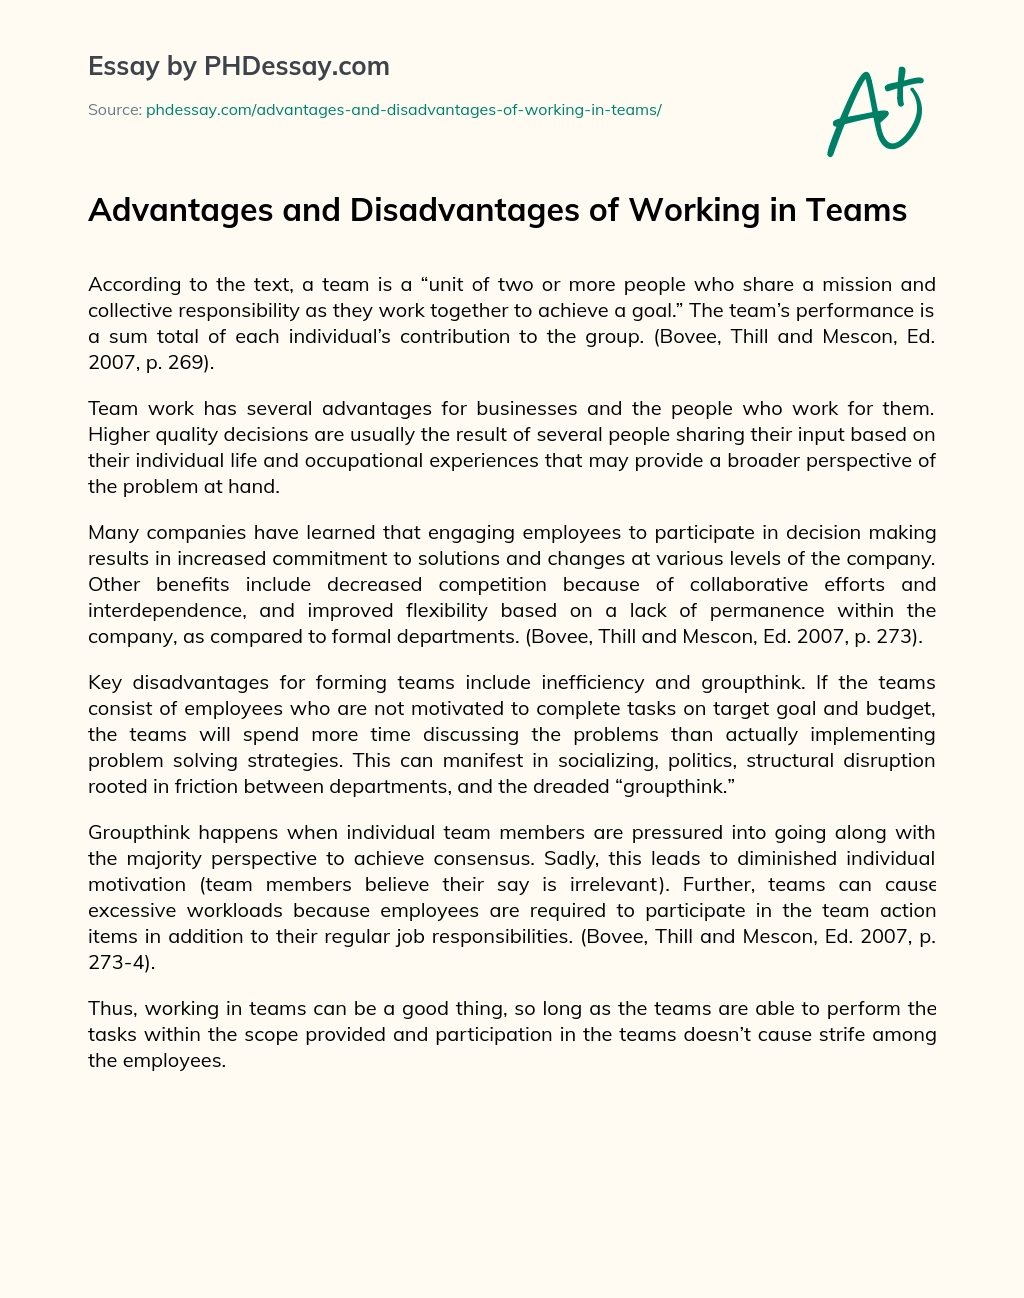 Advantages and Disadvantages of Working in Teams essay